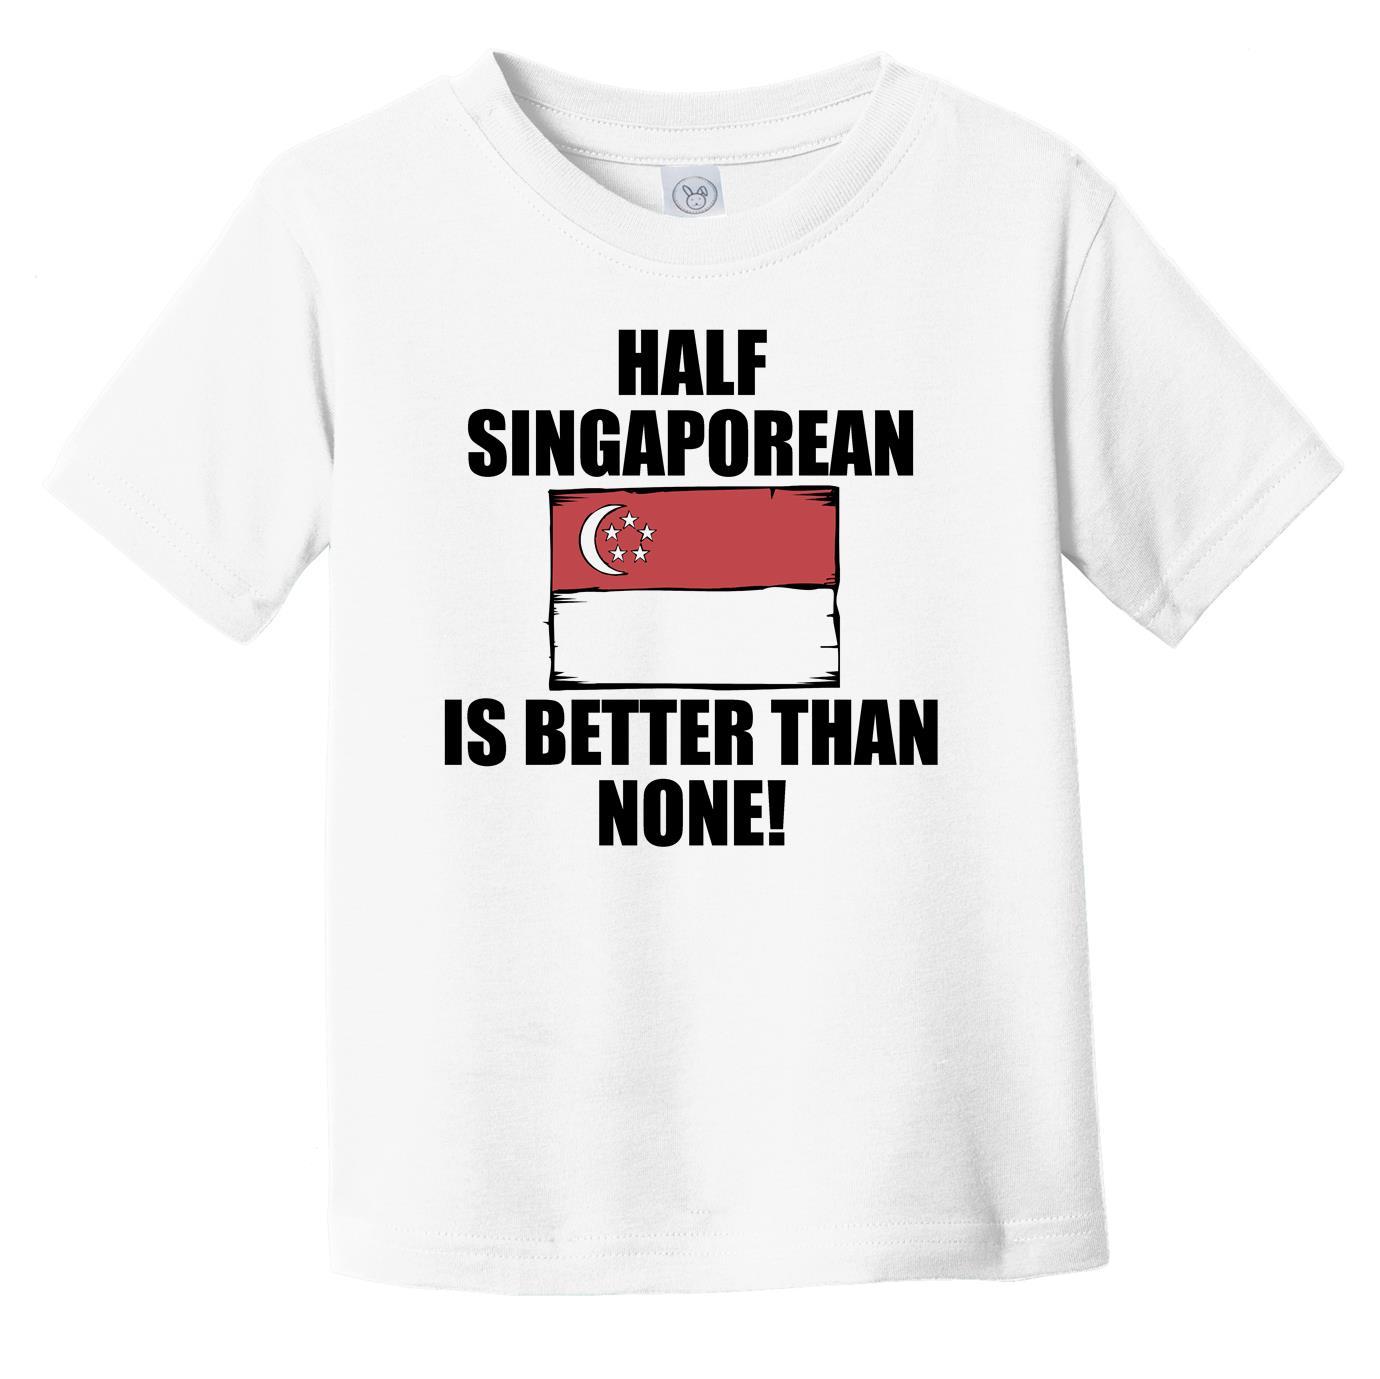 Half Singaporean Is Better Than None Infant Toddler T-Shirt